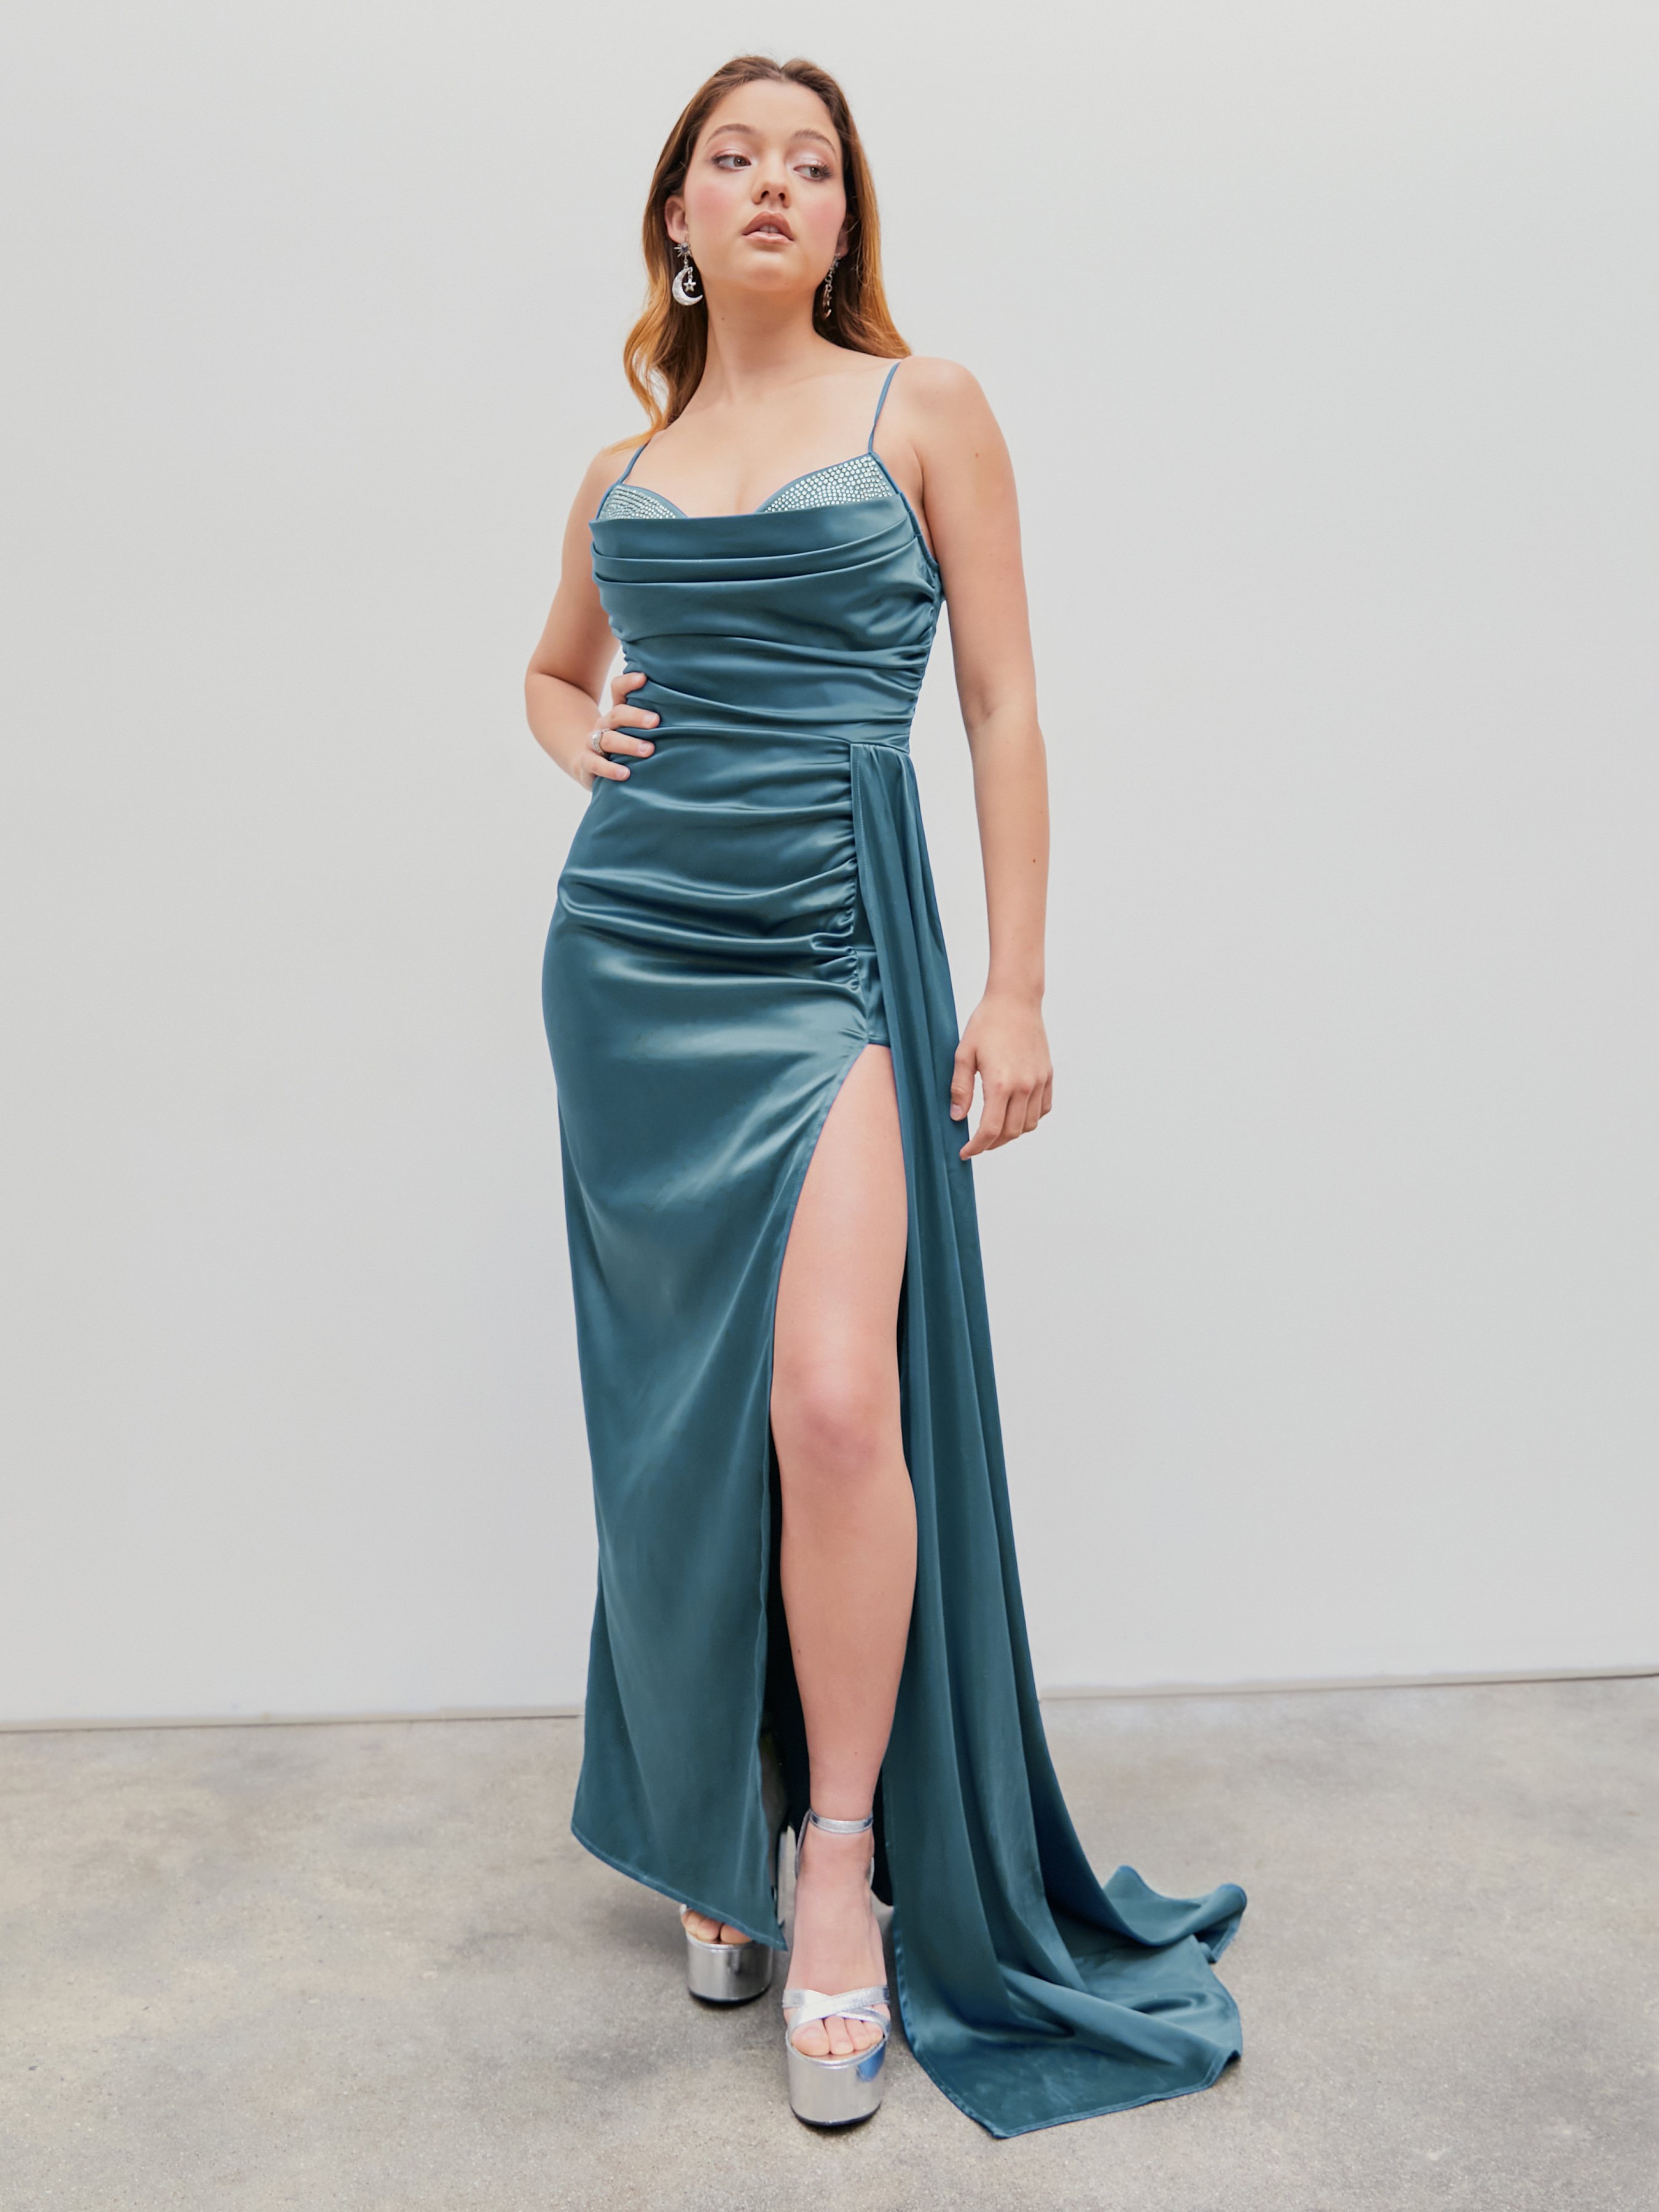 Satin Solid Cowl Neck Ruched Slit Maxi Dress For Party/Clubbing